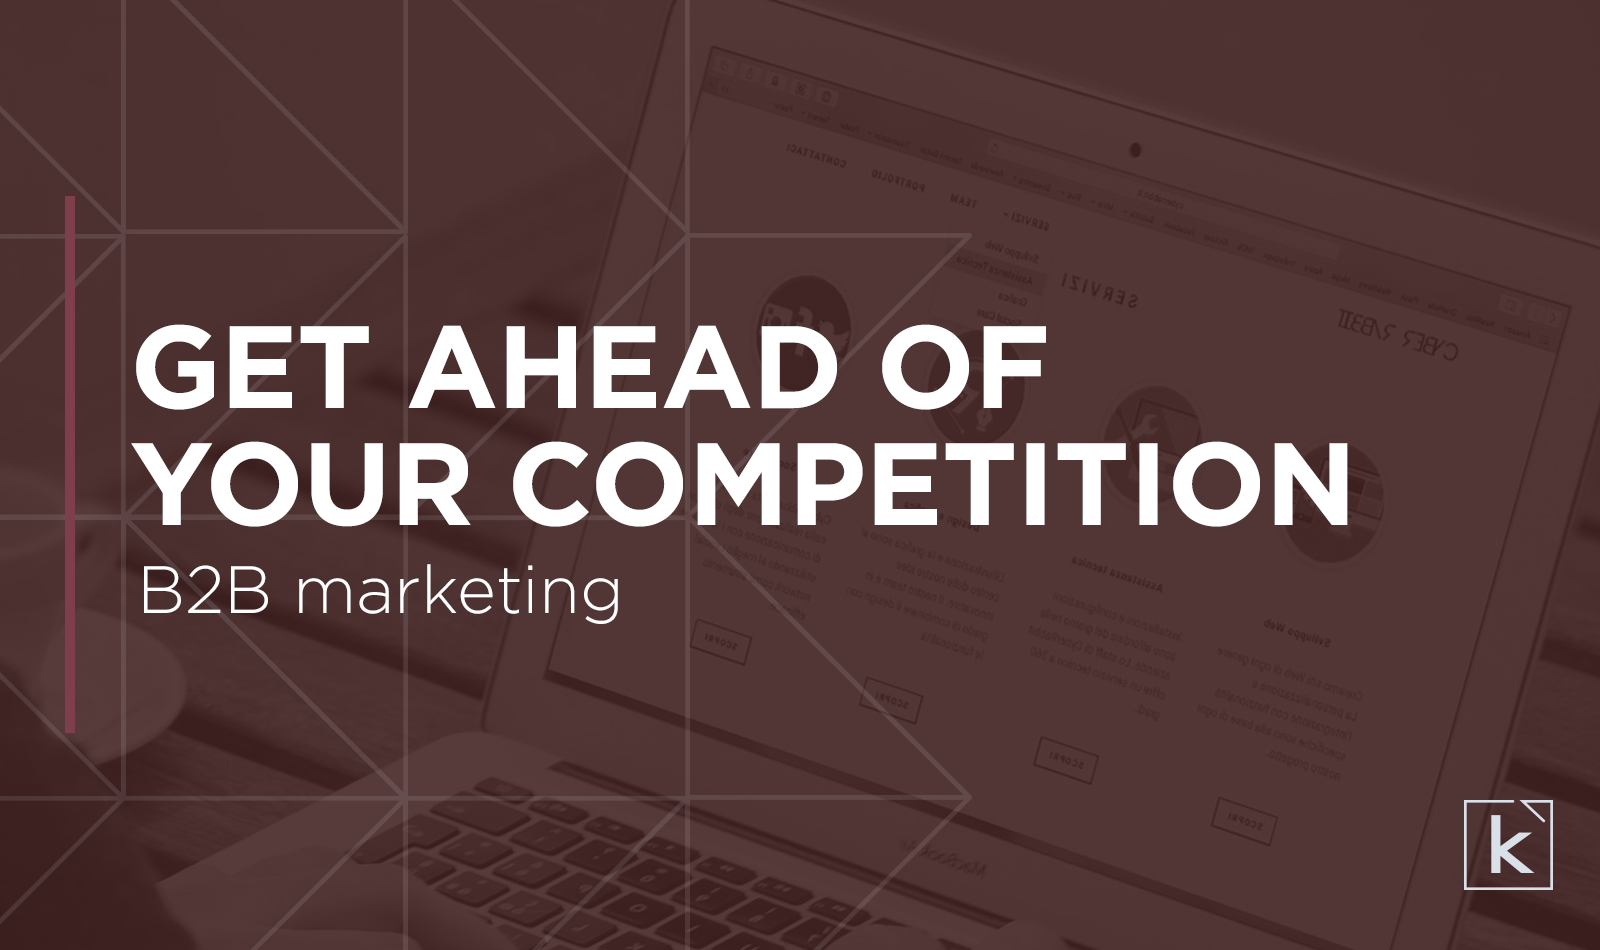 b2b-marketing-get-ahead-of-competition